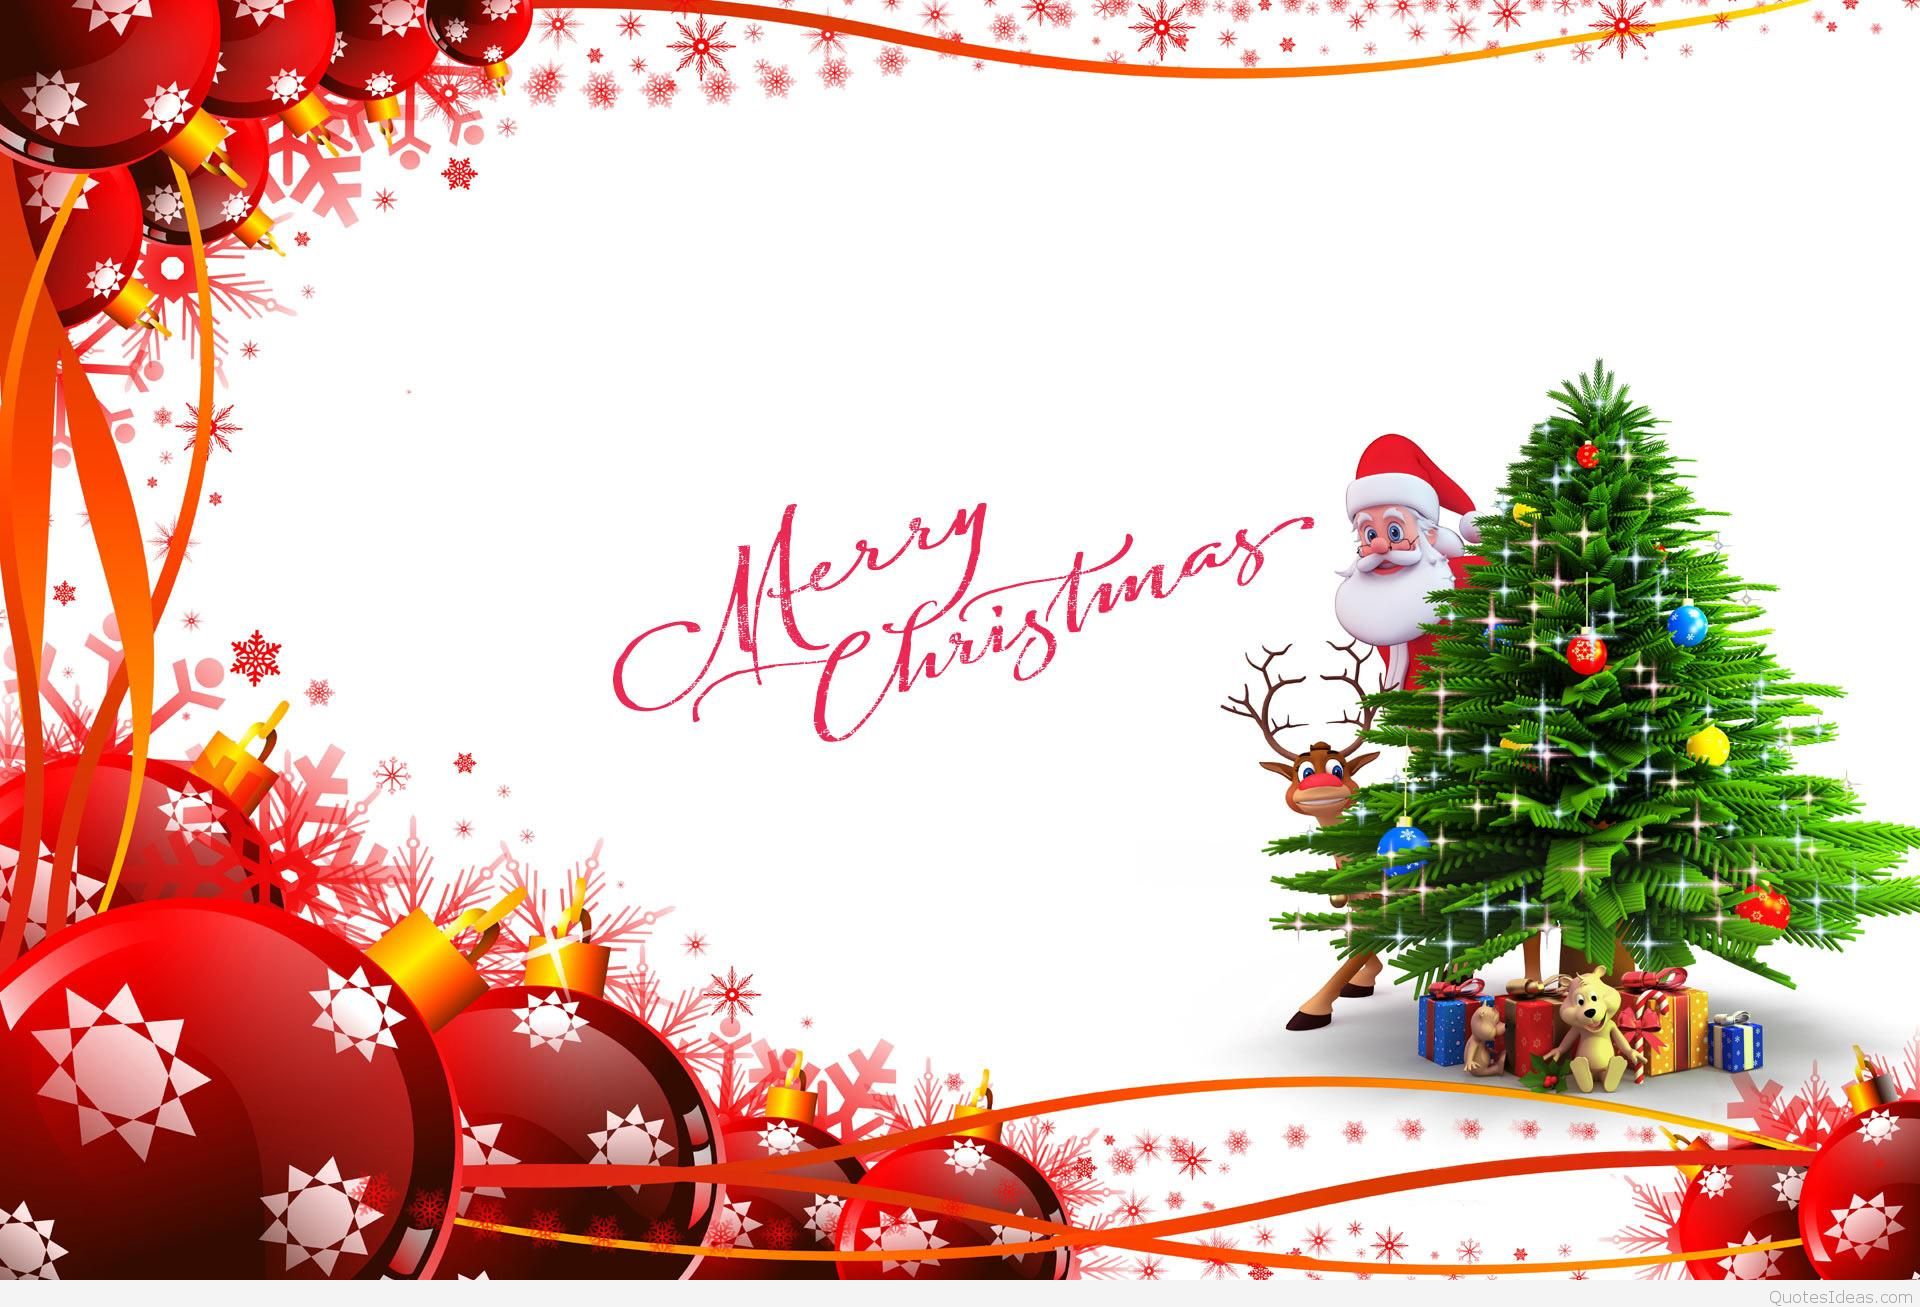 Pretty Merry Christmas Wallpaper Hd - Christmas Wishes Images Hd - HD Wallpaper 